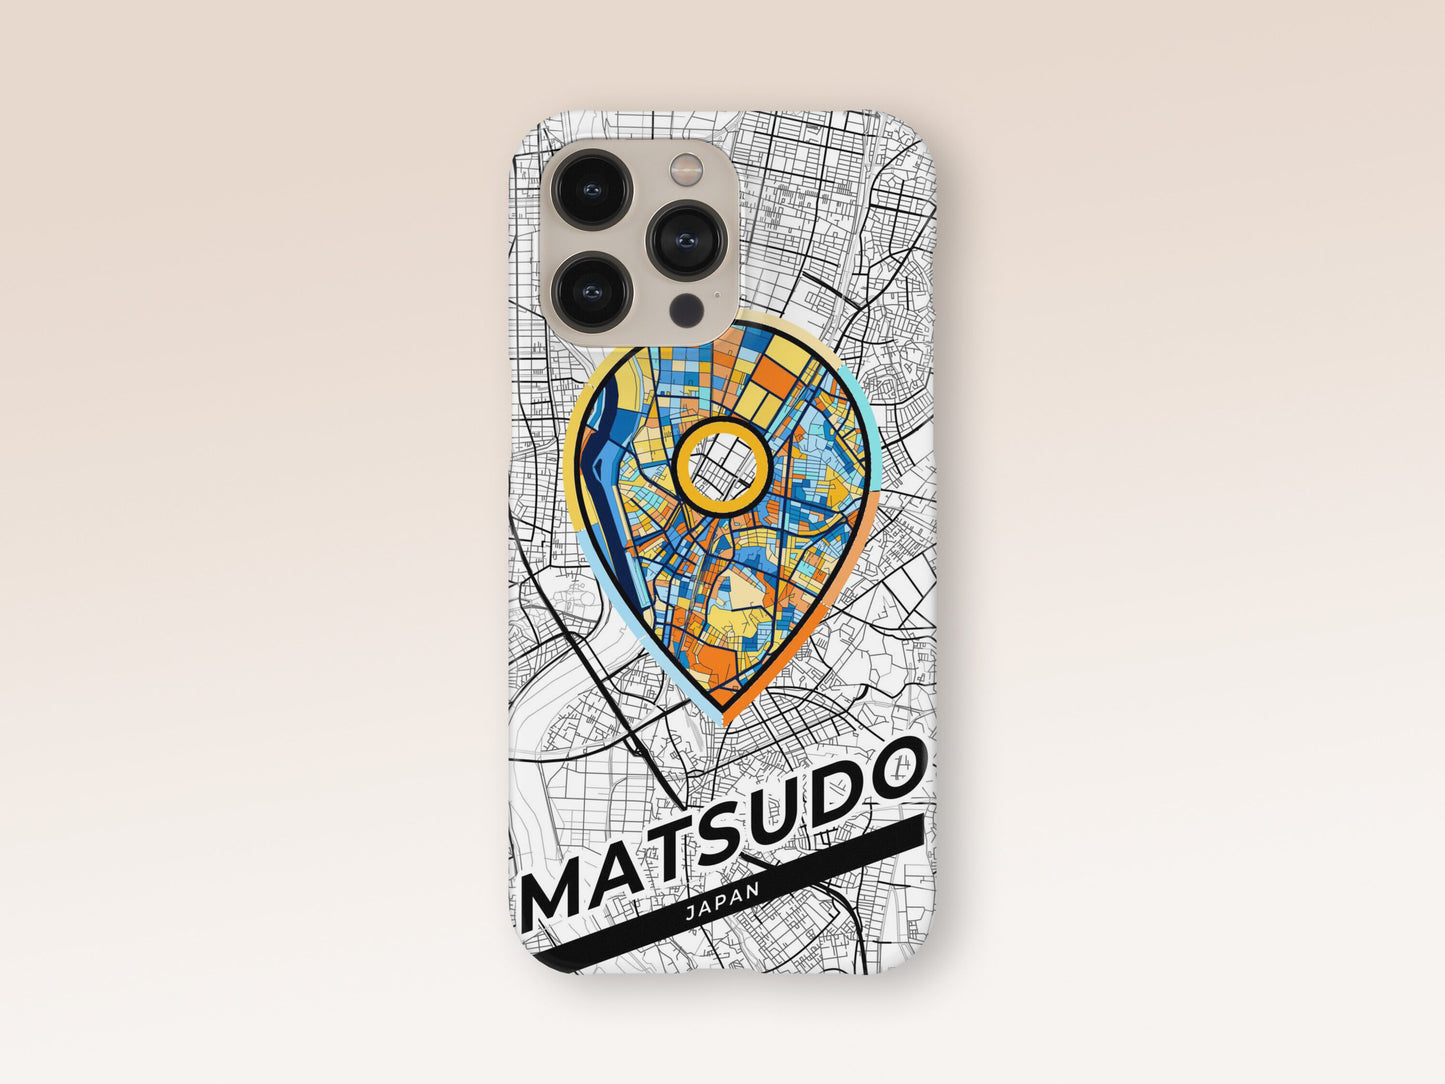 Matsudo Japan slim phone case with colorful icon. Birthday, wedding or housewarming gift. Couple match cases. 1